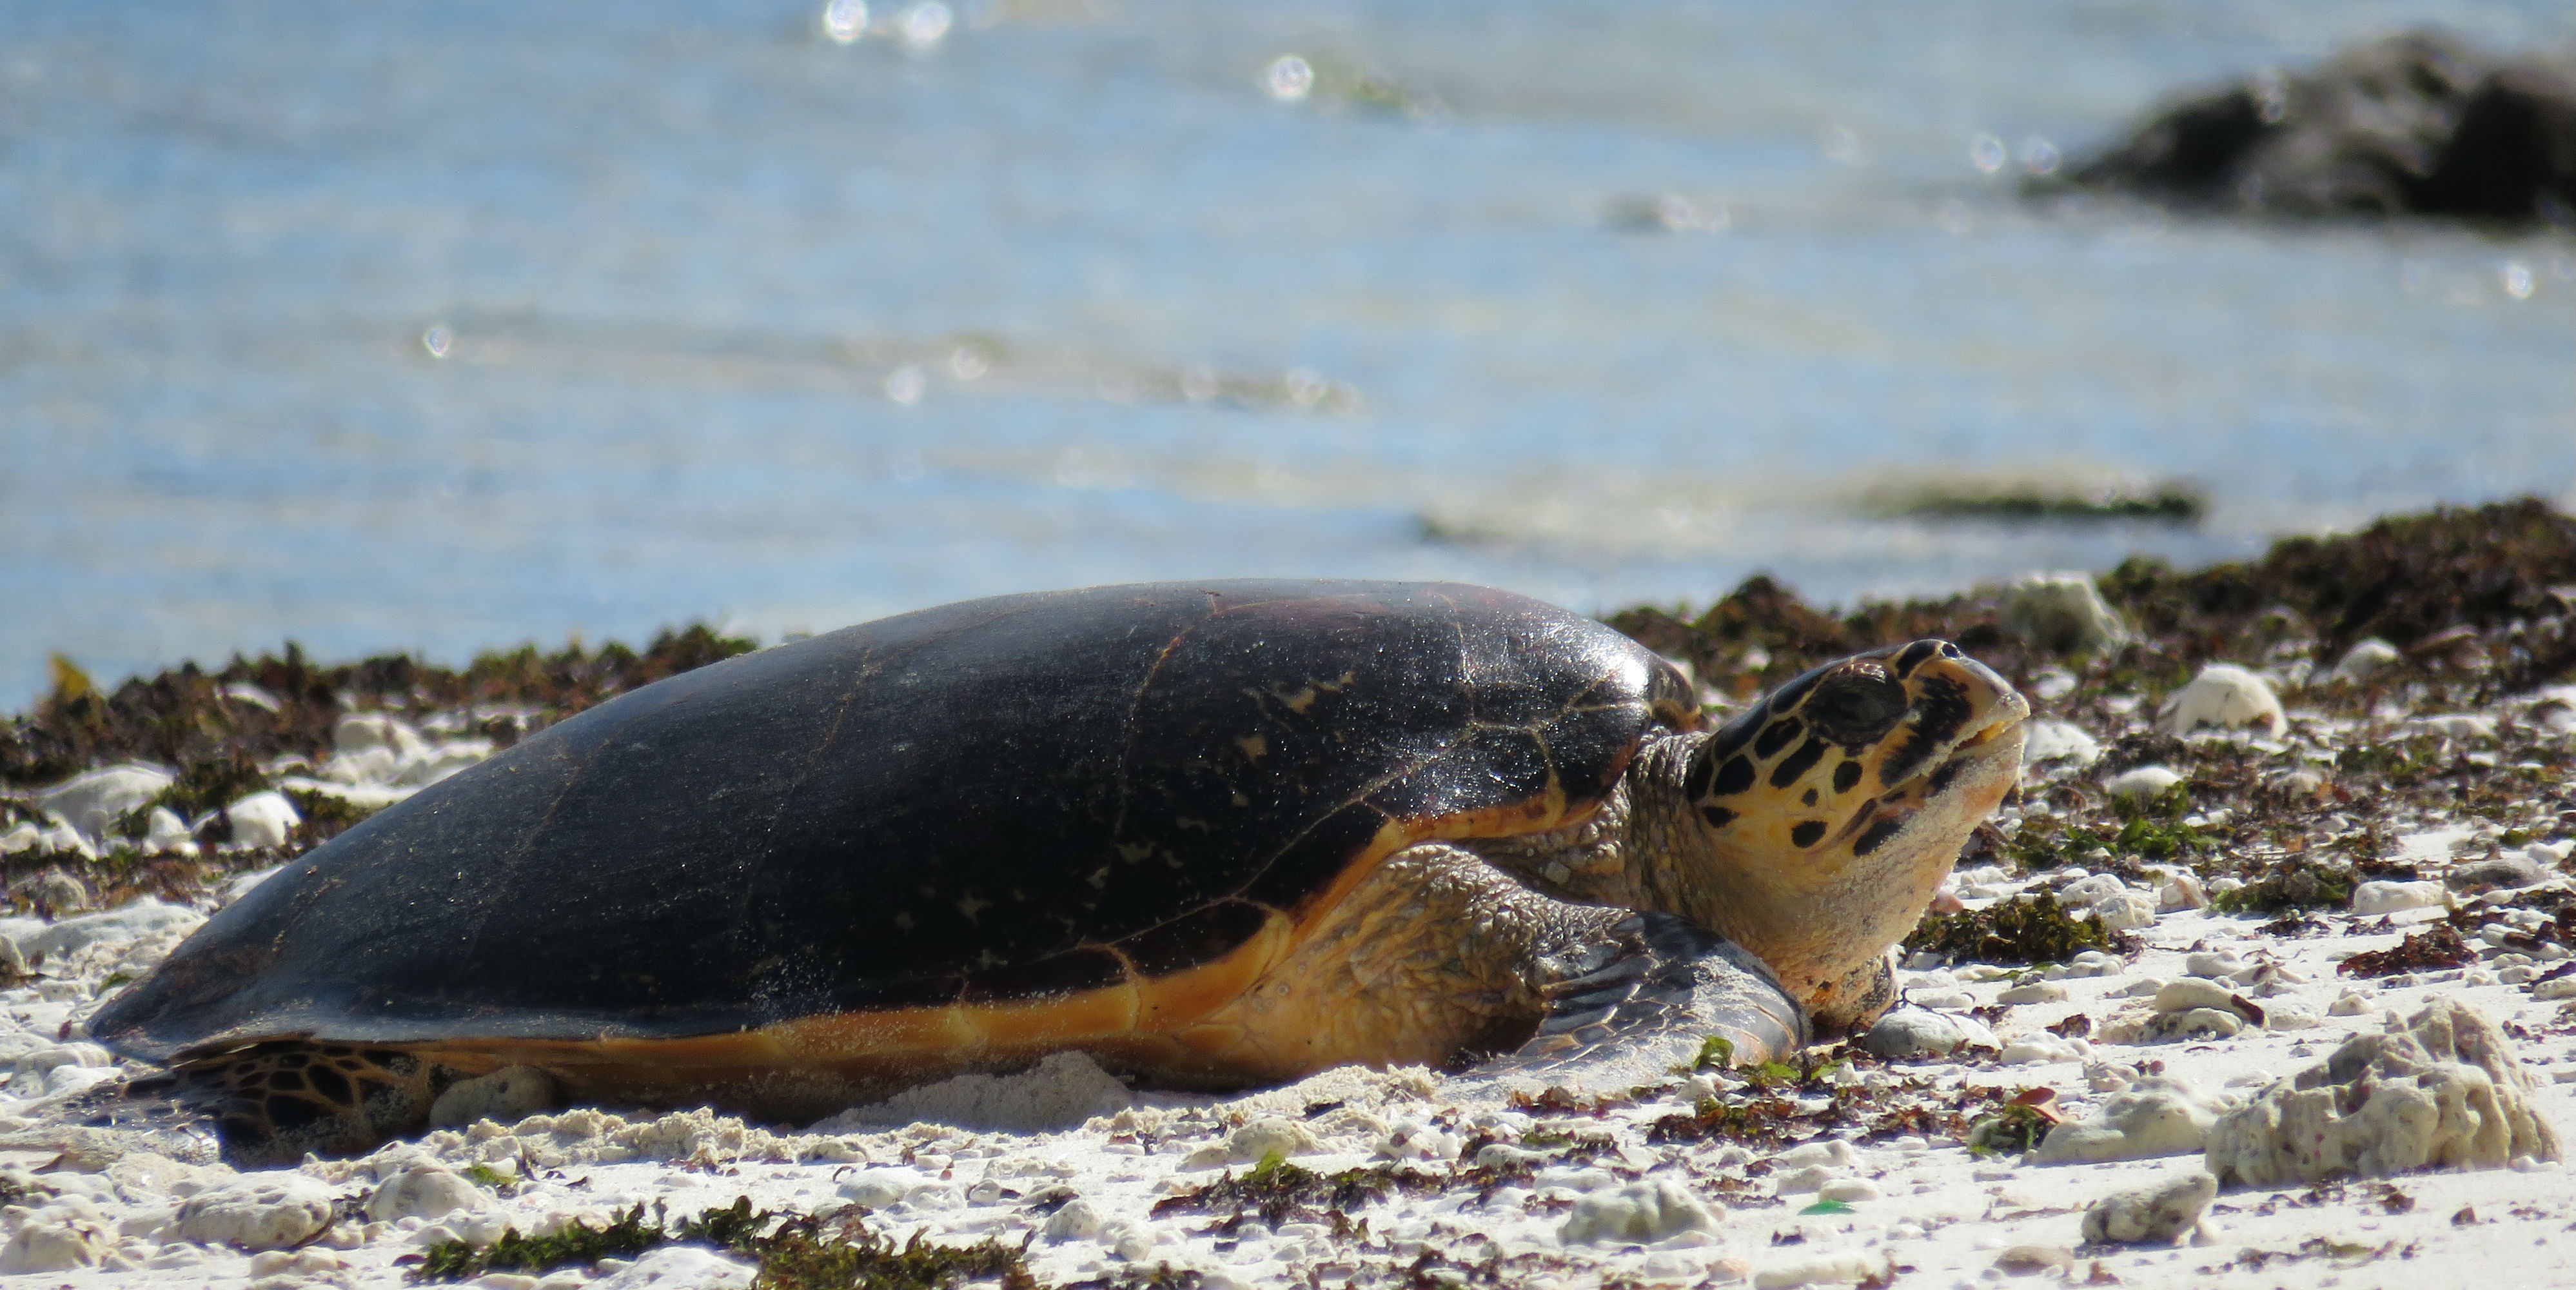 Learn more about endangered sea turtles and how you can help to protect